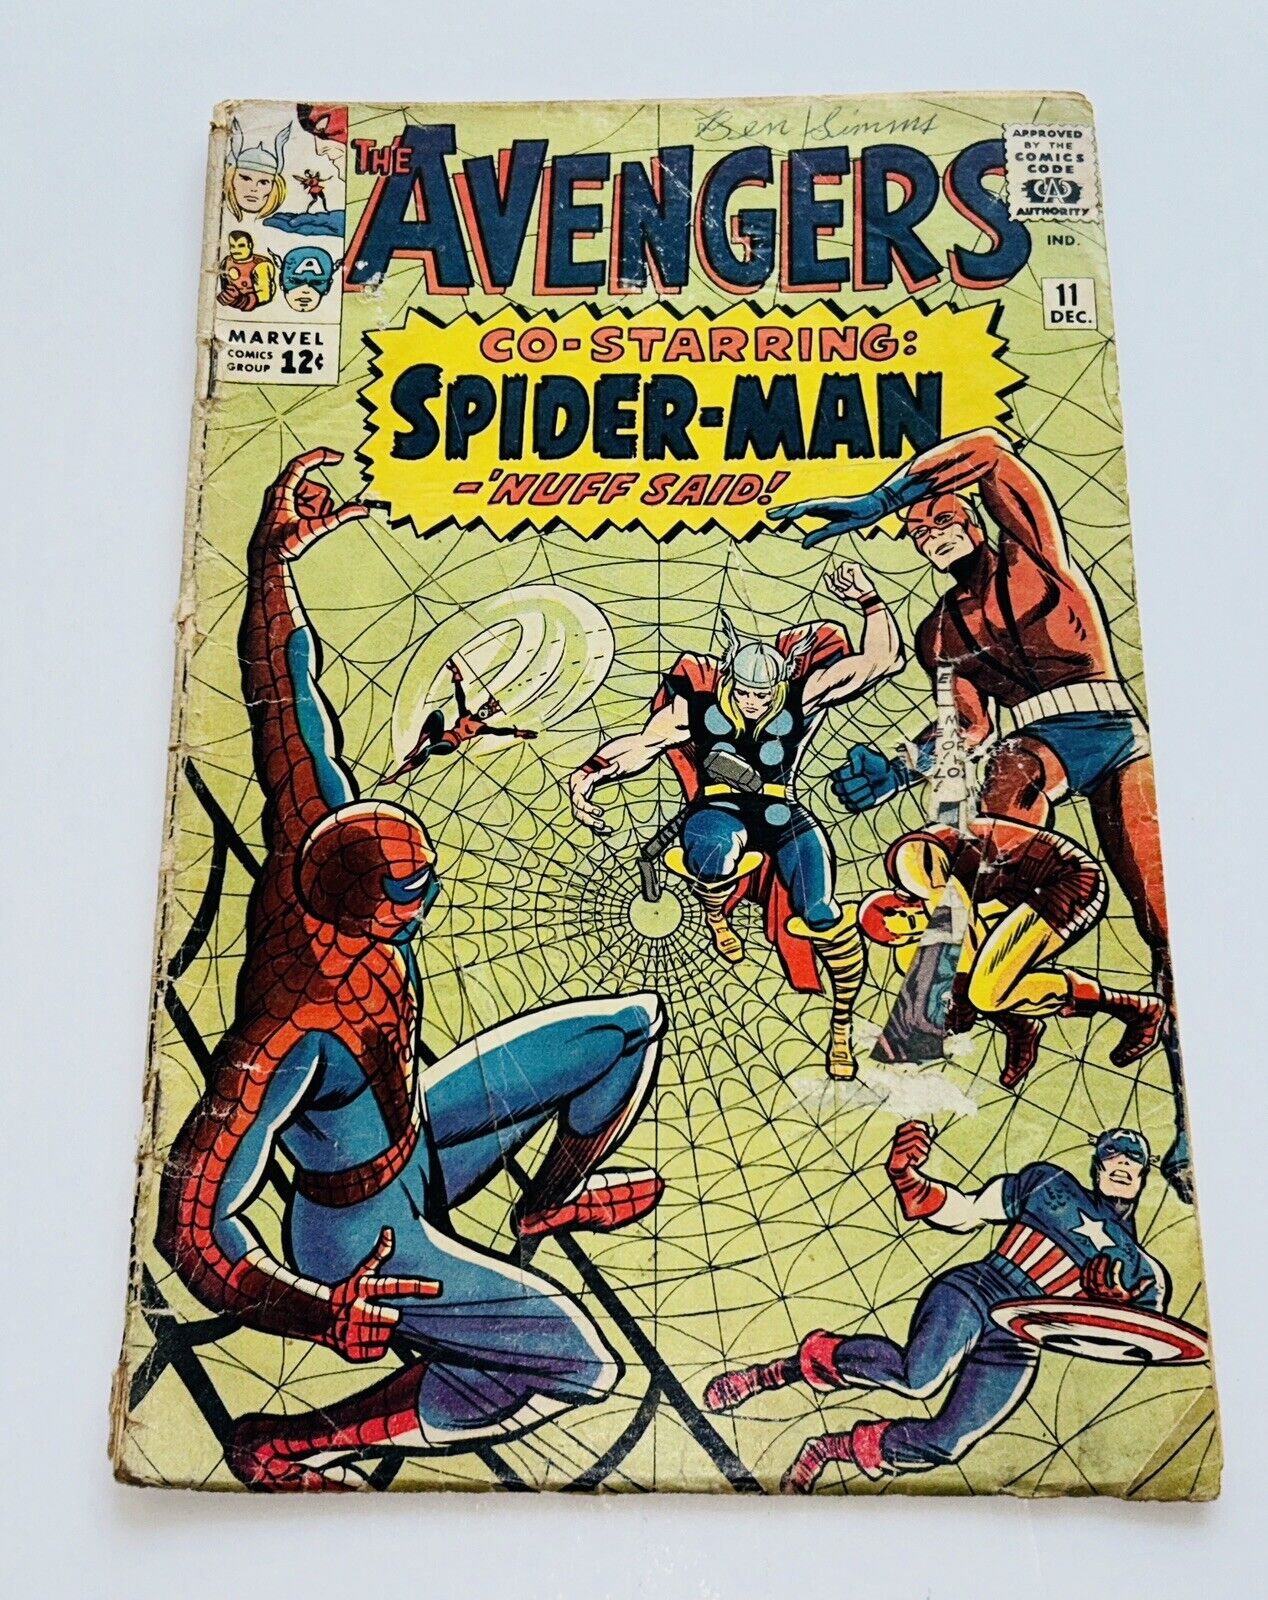 Avengers 11 1964 Silver Age Amazing Spider-Man Poor Incomplete